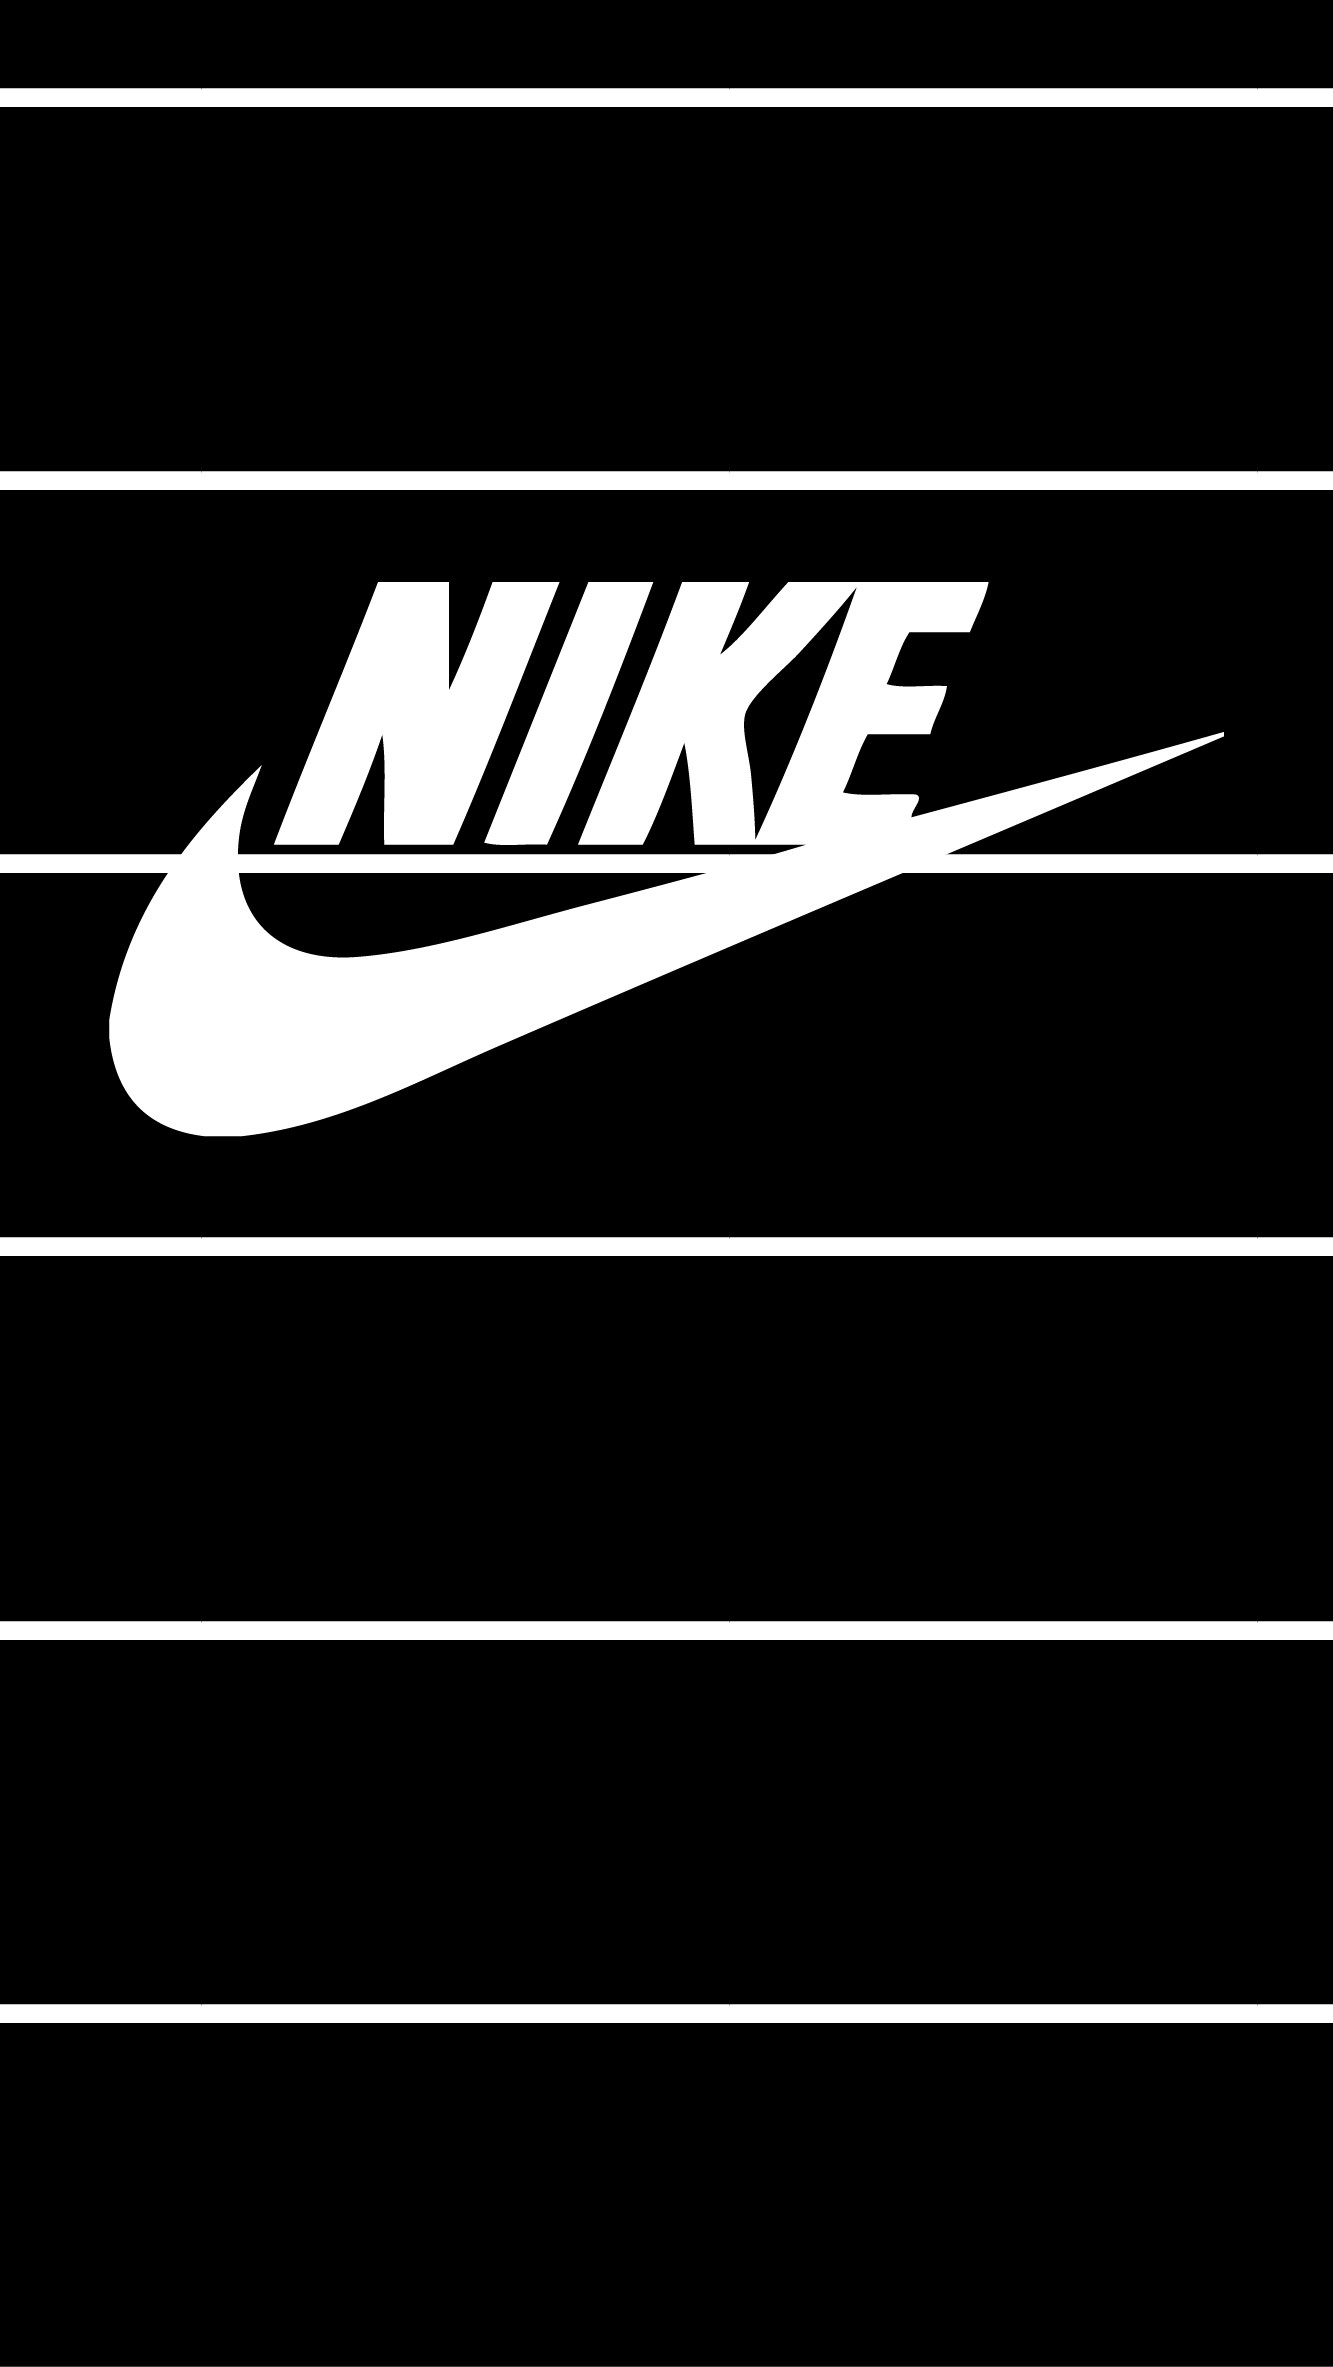 Nike Wallpaper For Iphone 79 Images